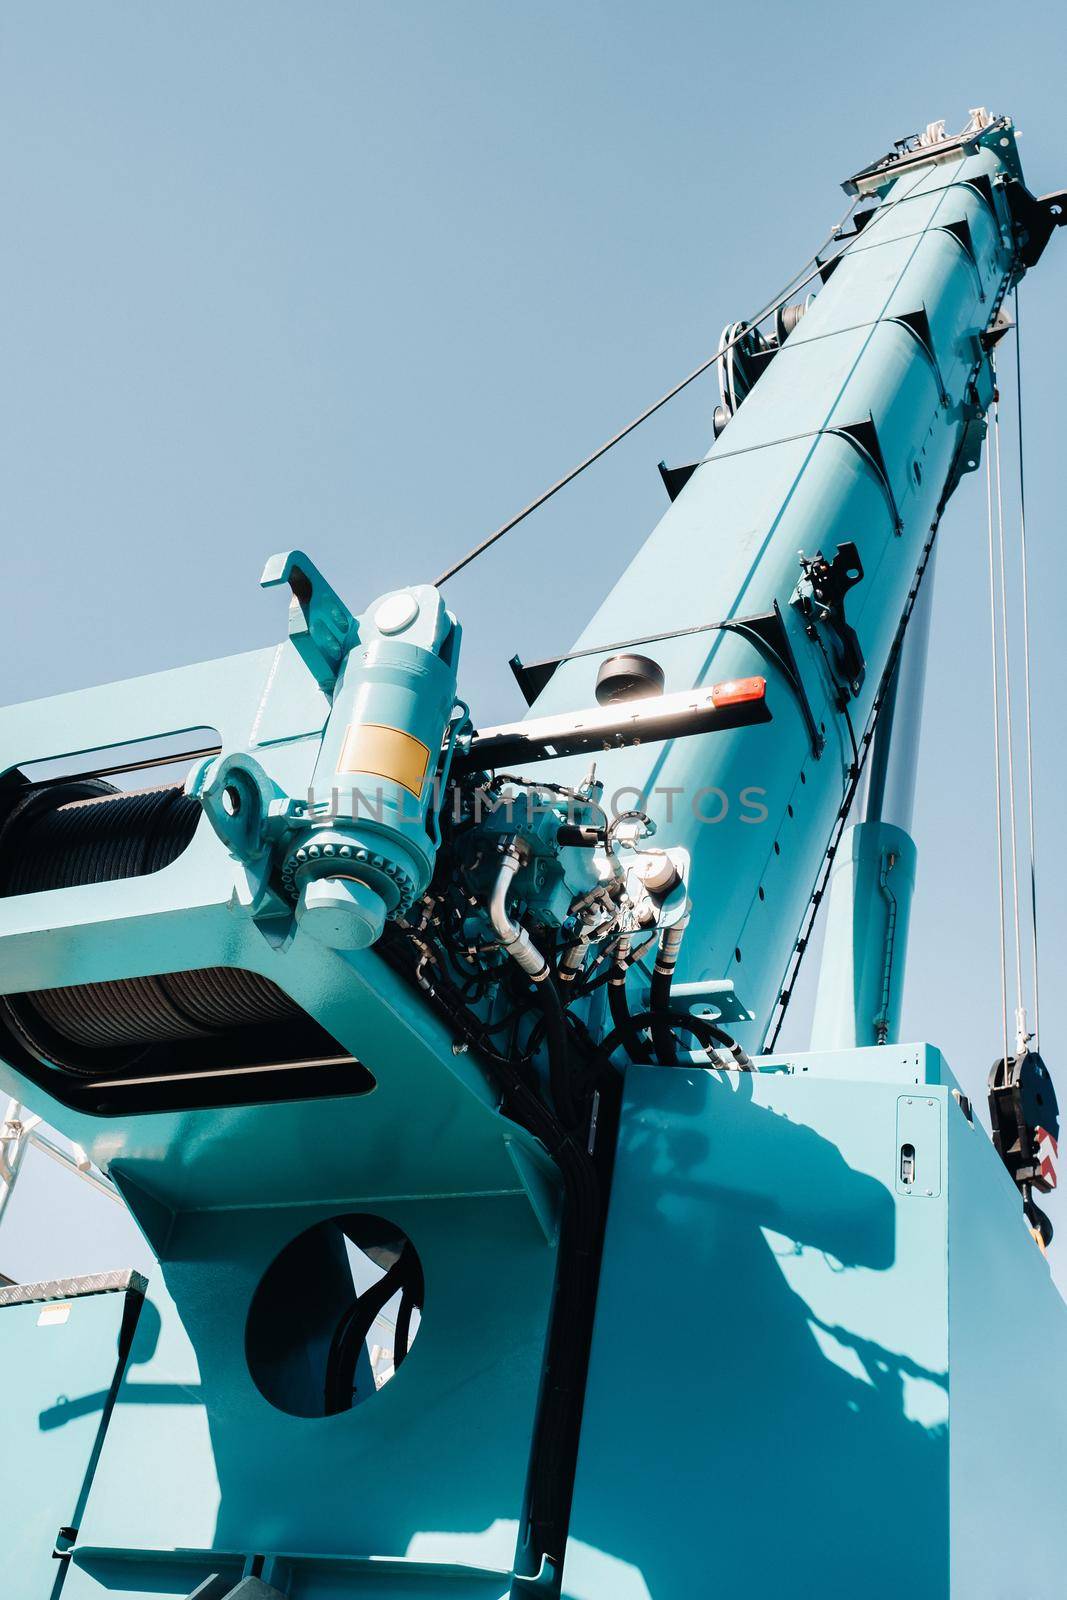 Hydrostatic crane engine.The control system of the crane engine.Lifting hydraulic Department on the truck crane.The hydraulic system of the engine.hydraulic hoses on the crane.autoparts.